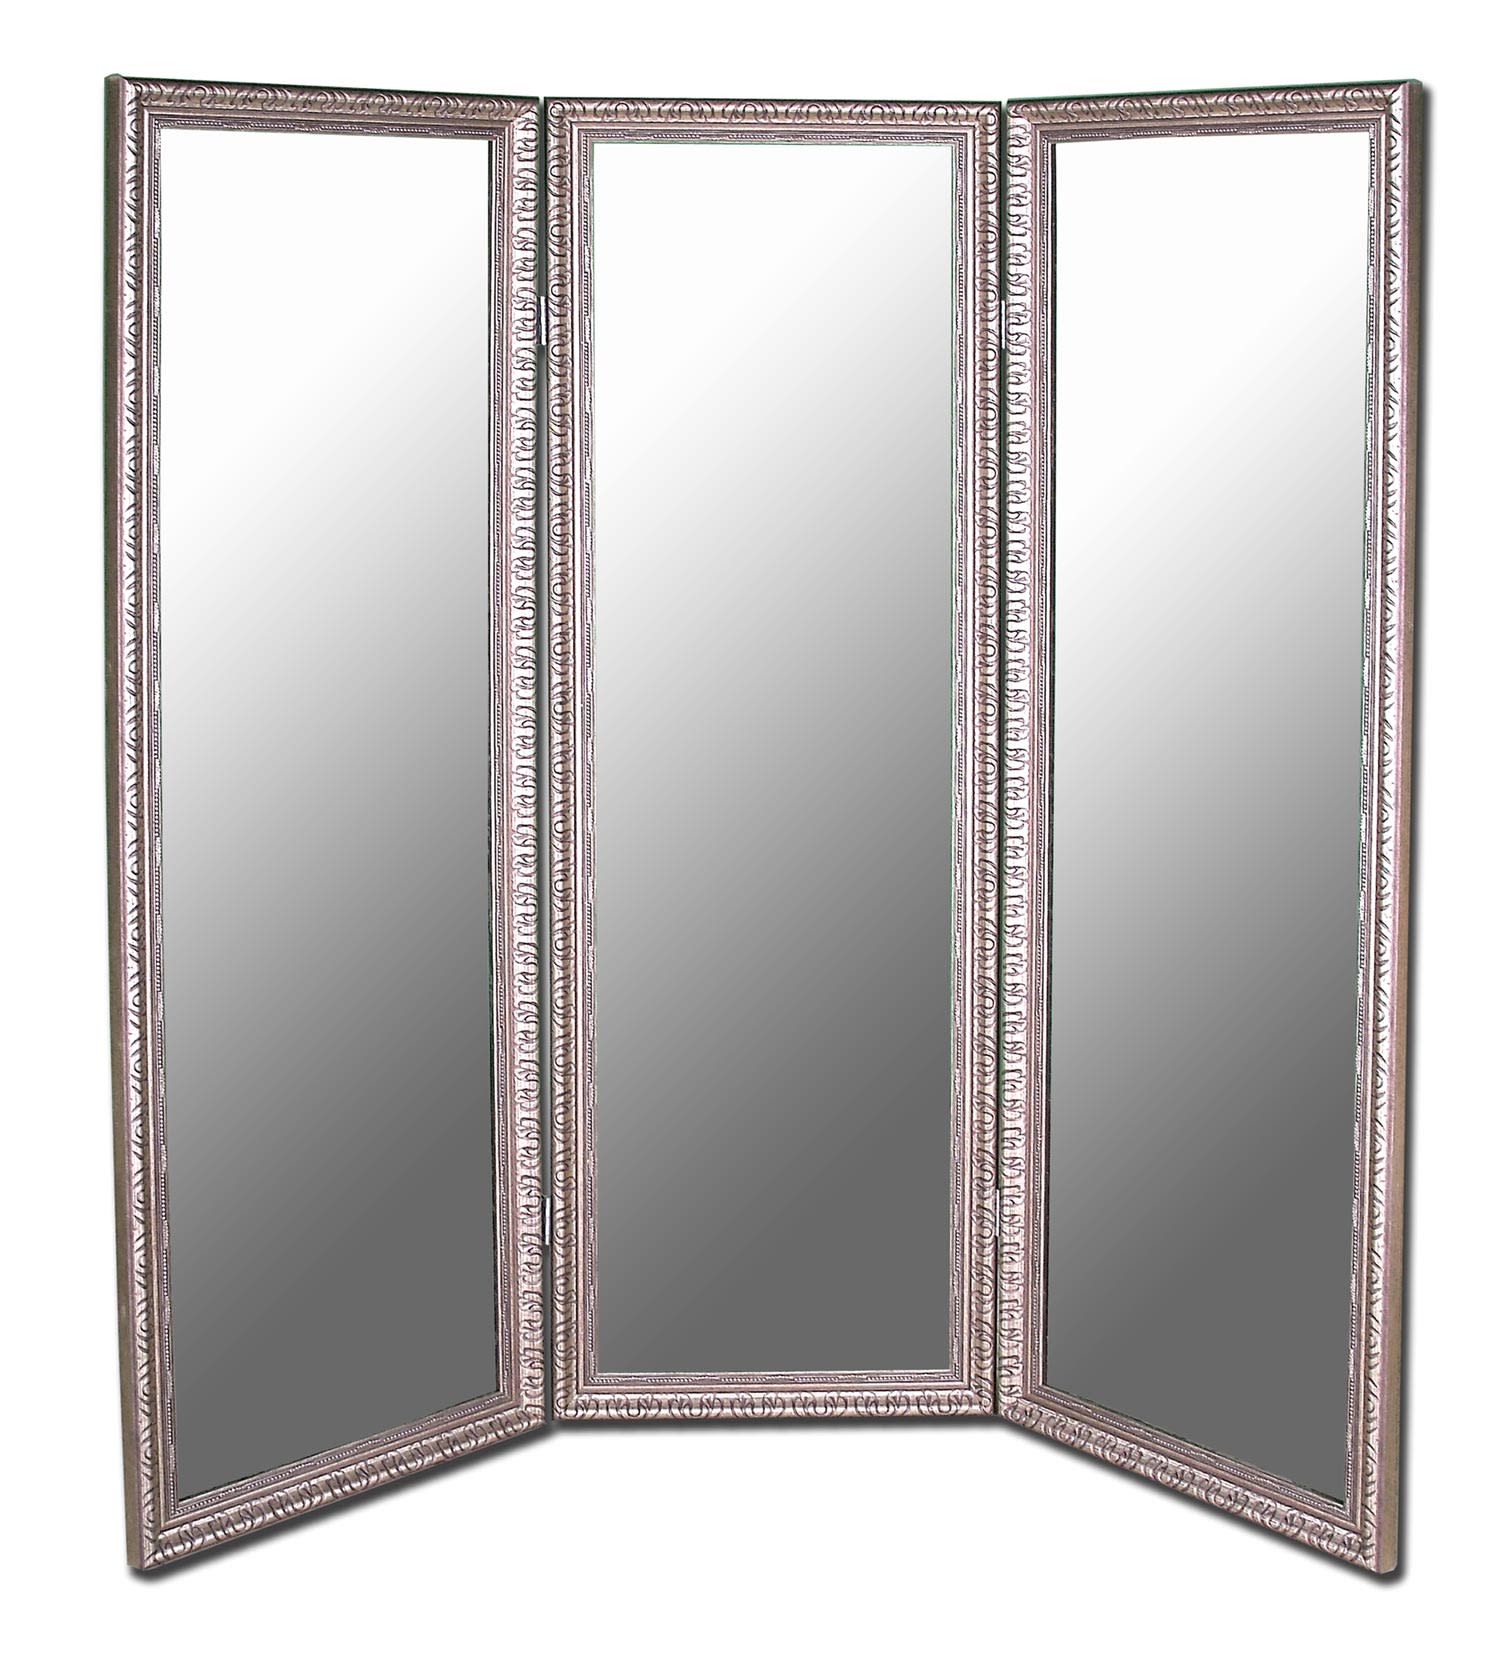 Hitchcock Butterfield 6702 Pmrd Cameo Collection Mirrored Room Divider